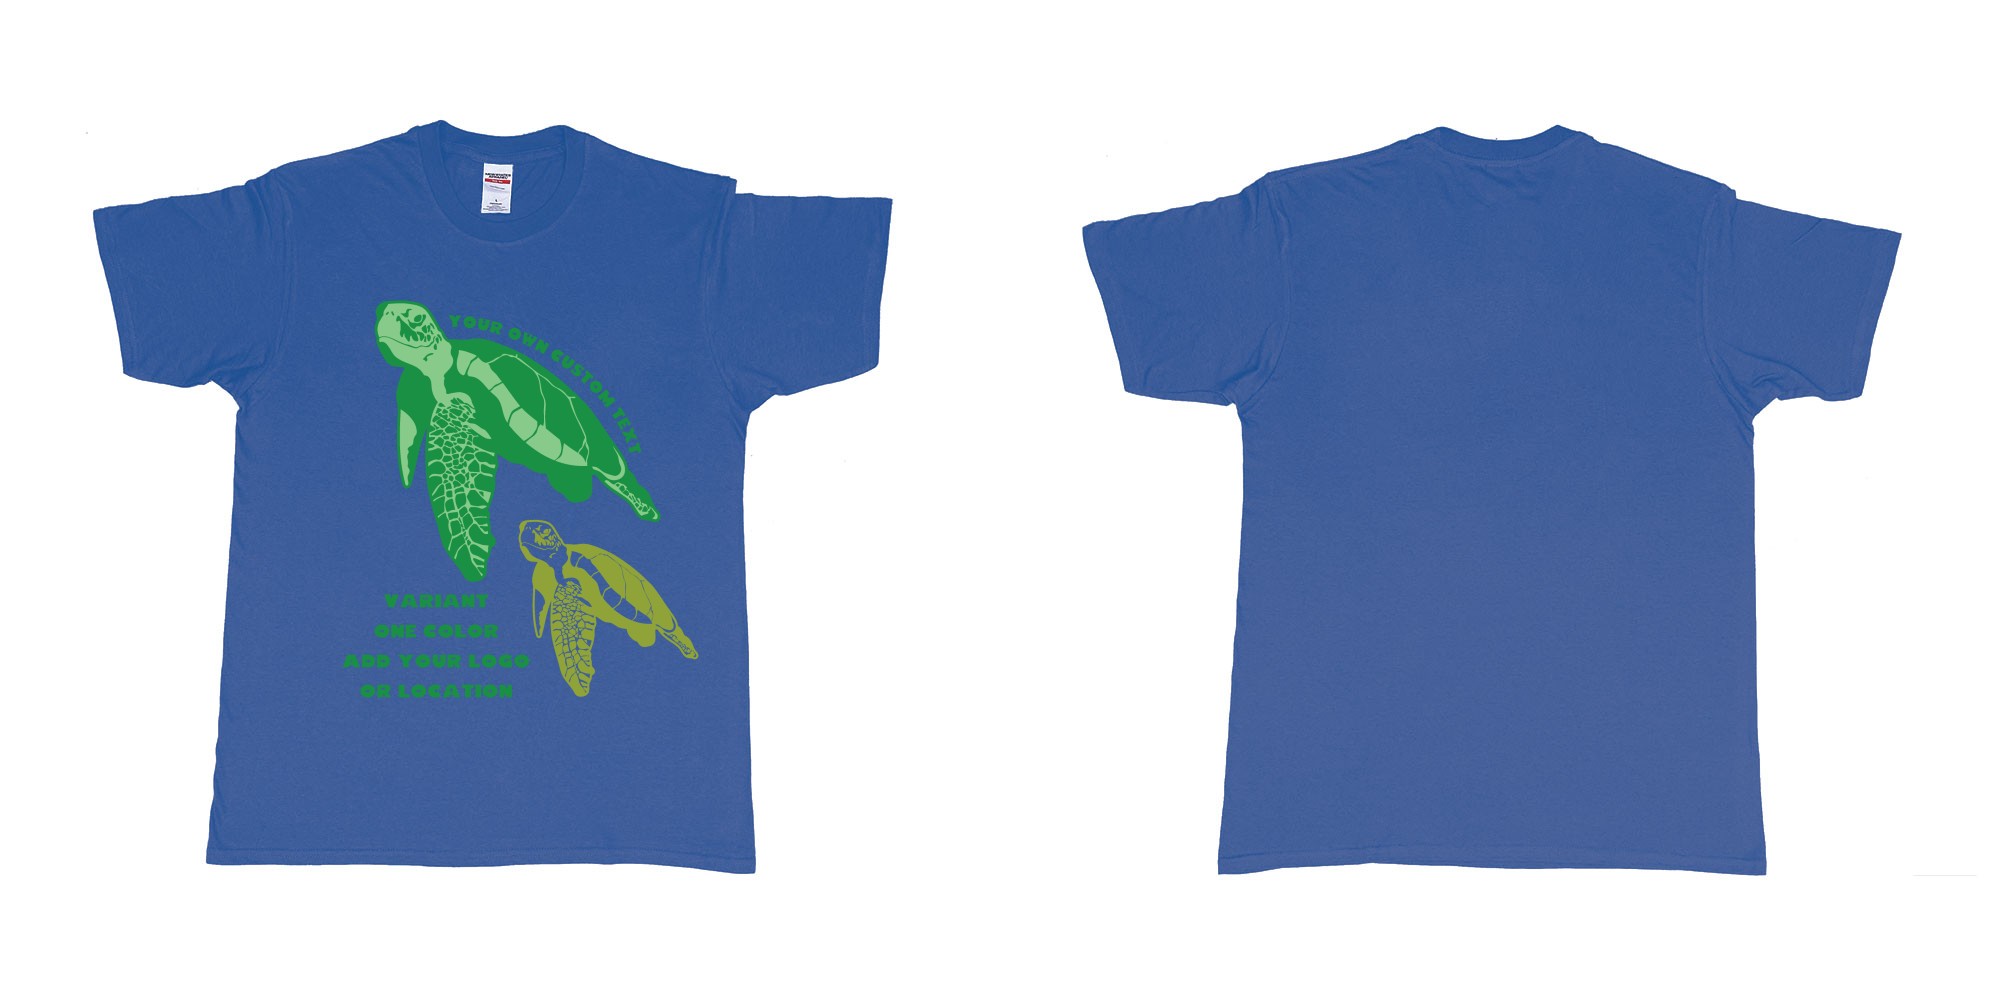 Custom tshirt design hawksbill green sea turtle chilling add logo in fabric color royal-blue choice your own text made in Bali by The Pirate Way